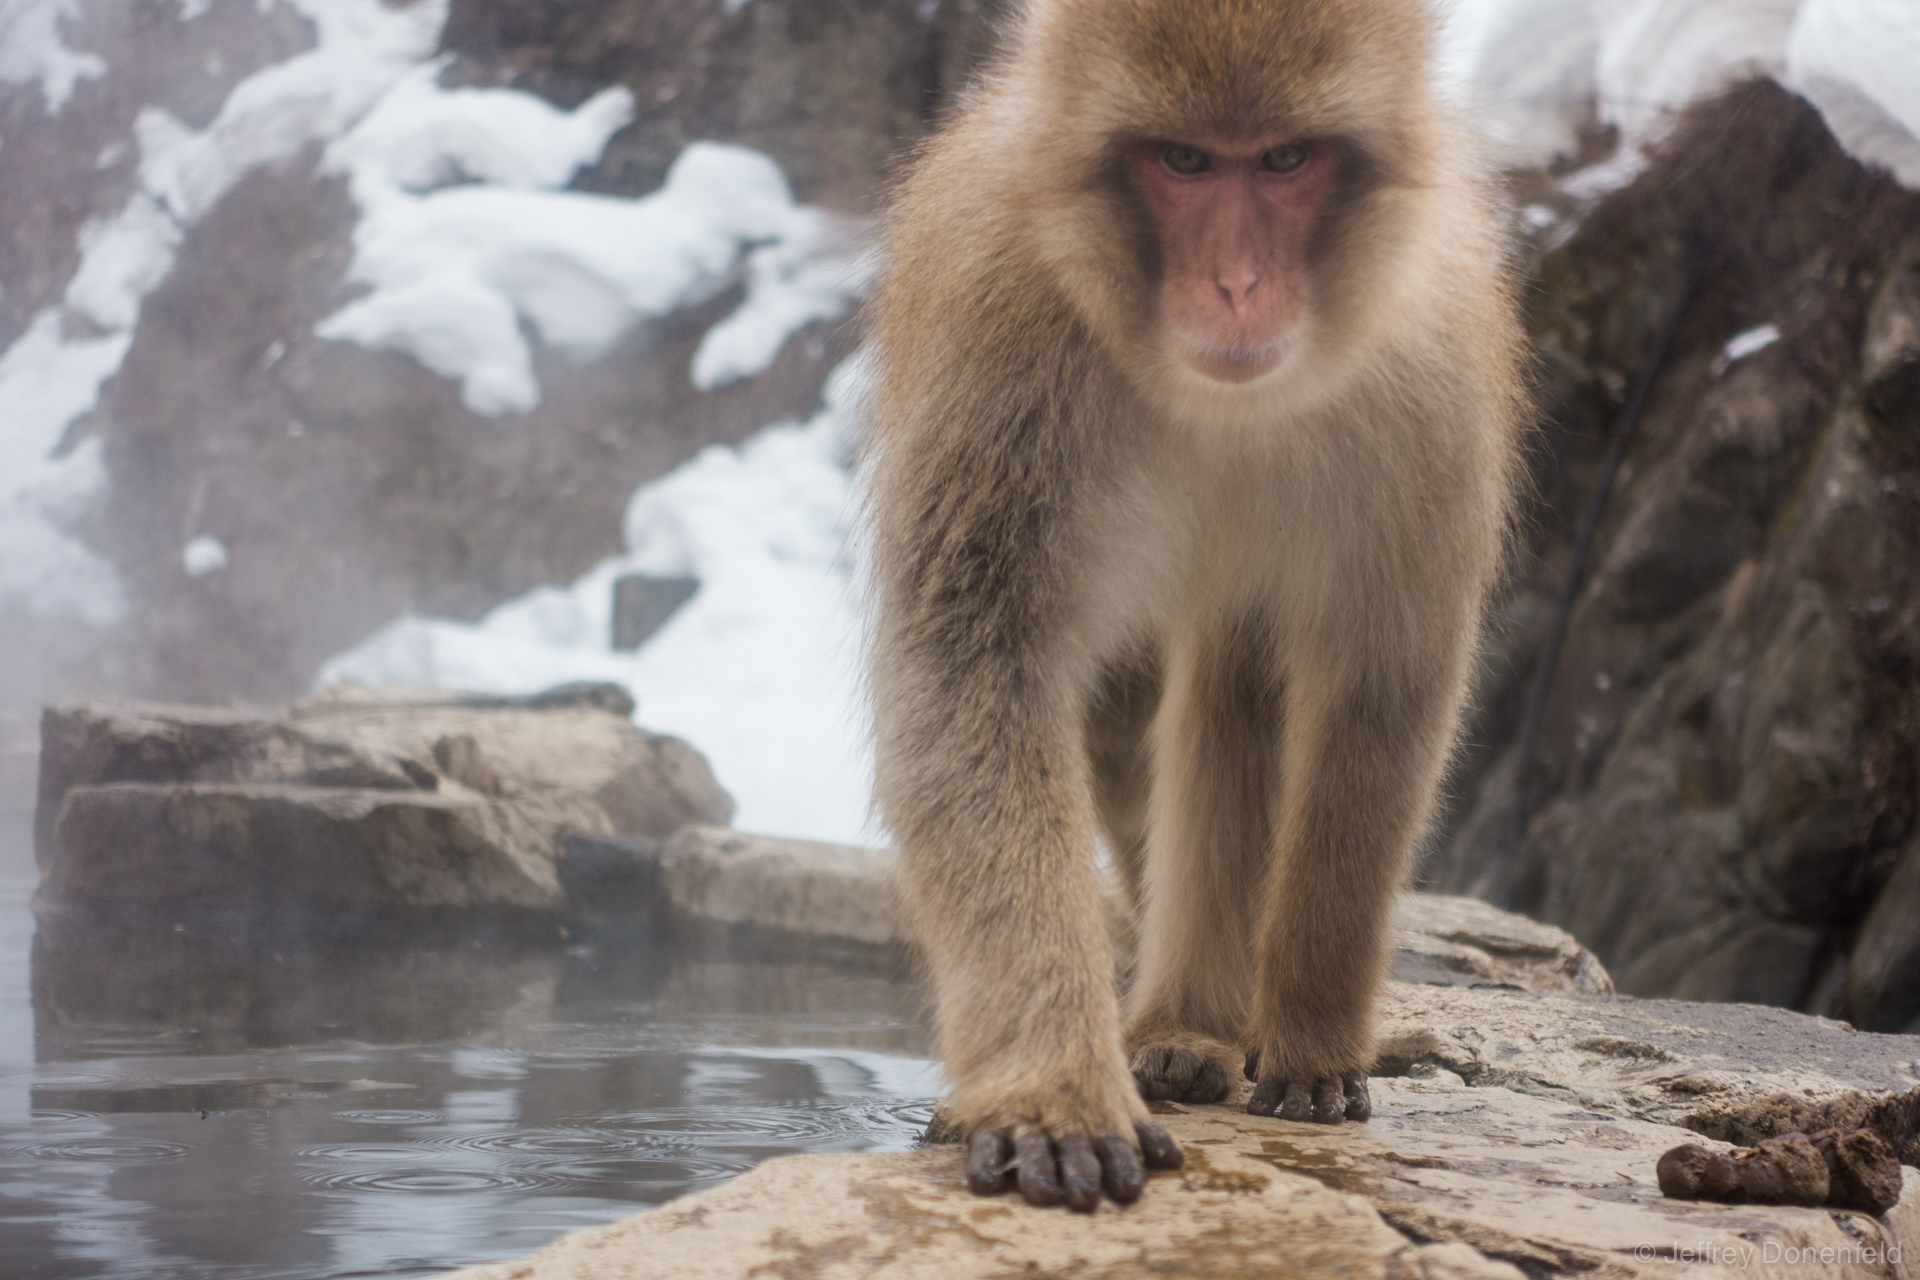 Snow monkeys love hanging out in the warm onsen. Only for monkeys though!